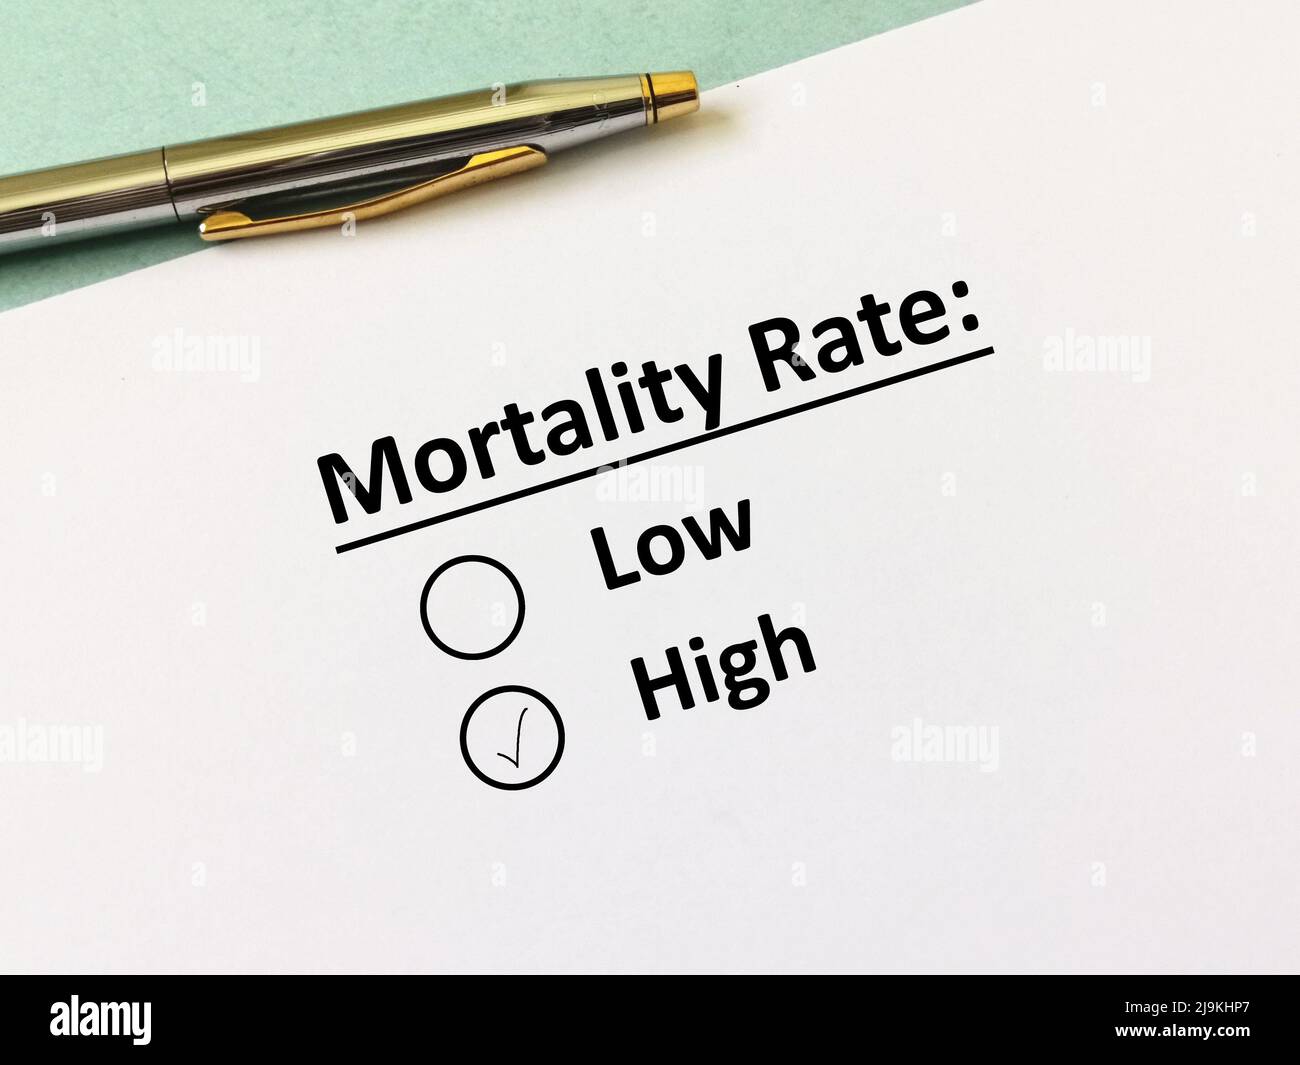 One person is answering question about medicine and treatment. The person thinks that the mortality rate is high. Stock Photo